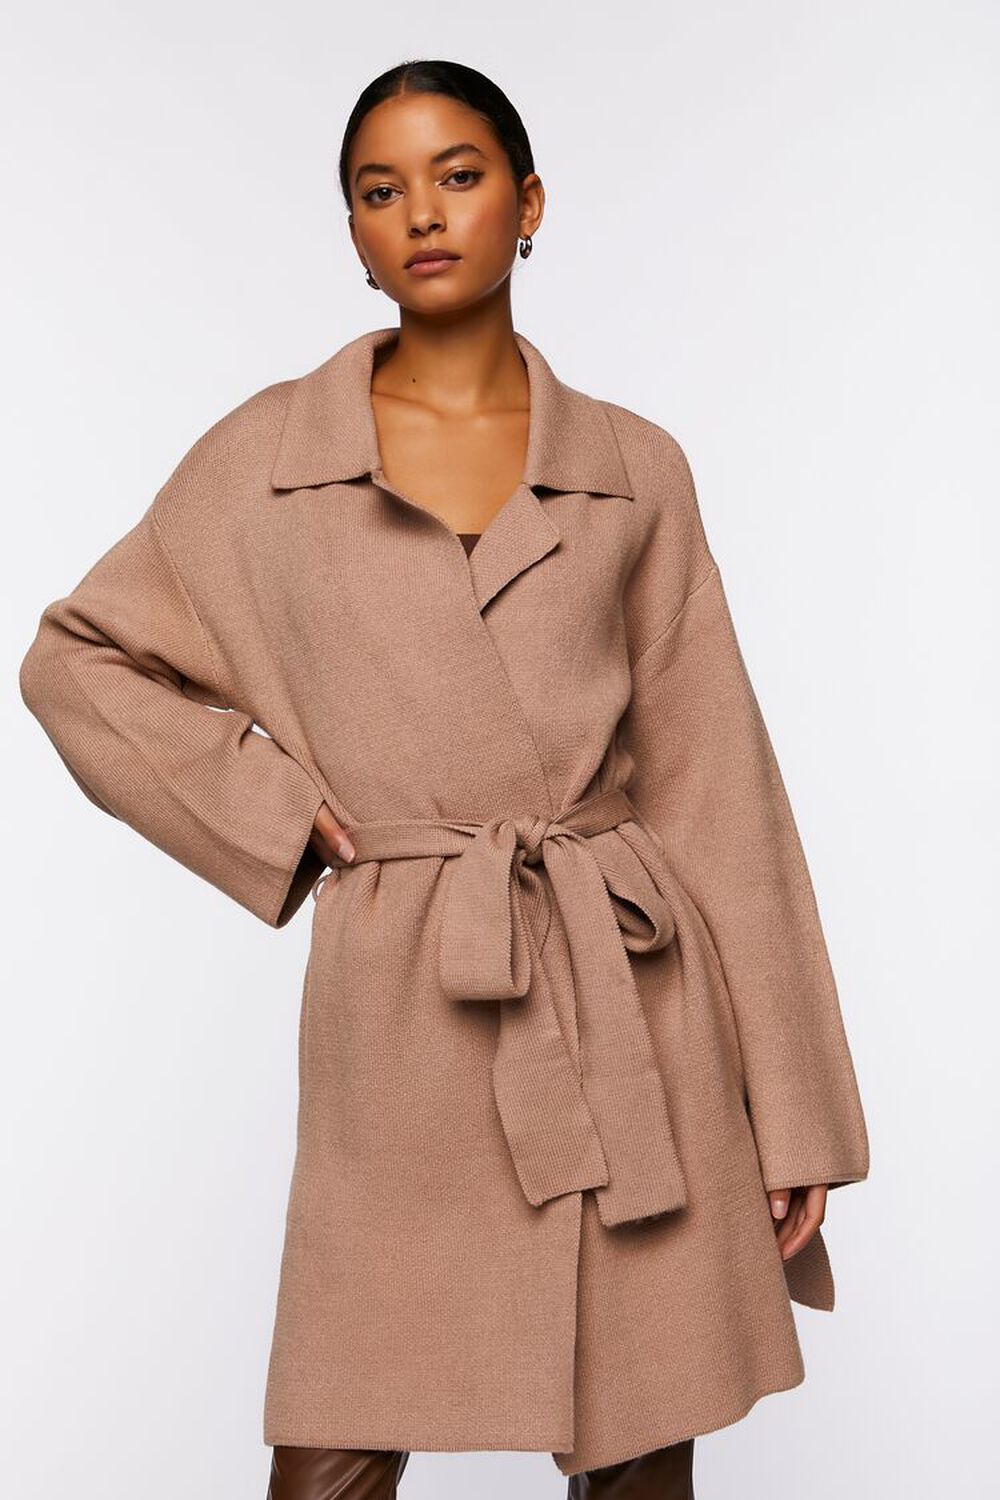 TAUPE Belted Duster Cardigan, image 1